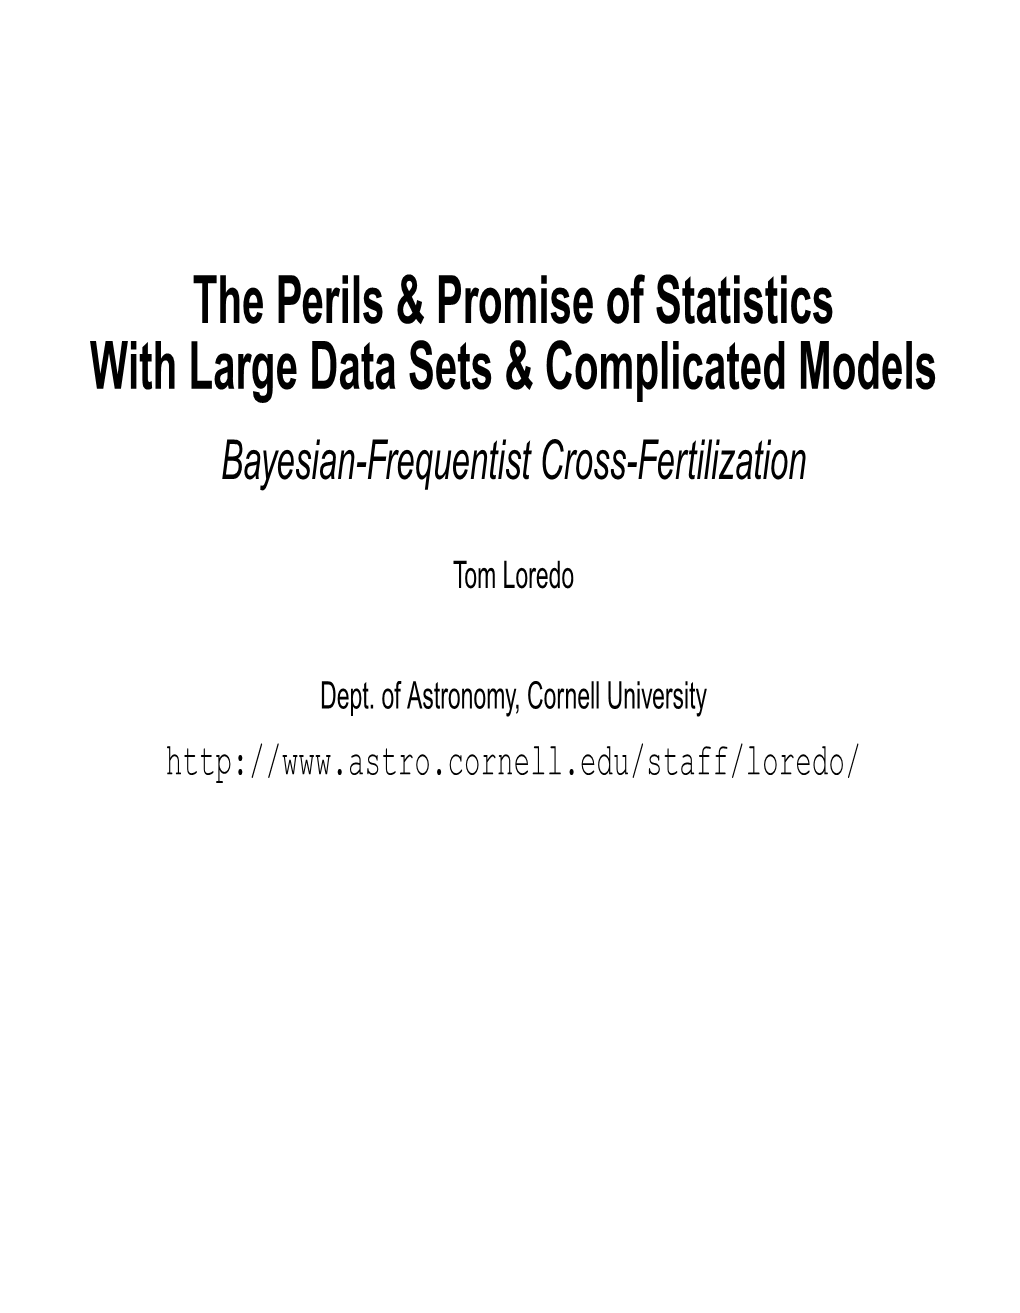 The Perils & Promise of Statistics with Large Data Sets